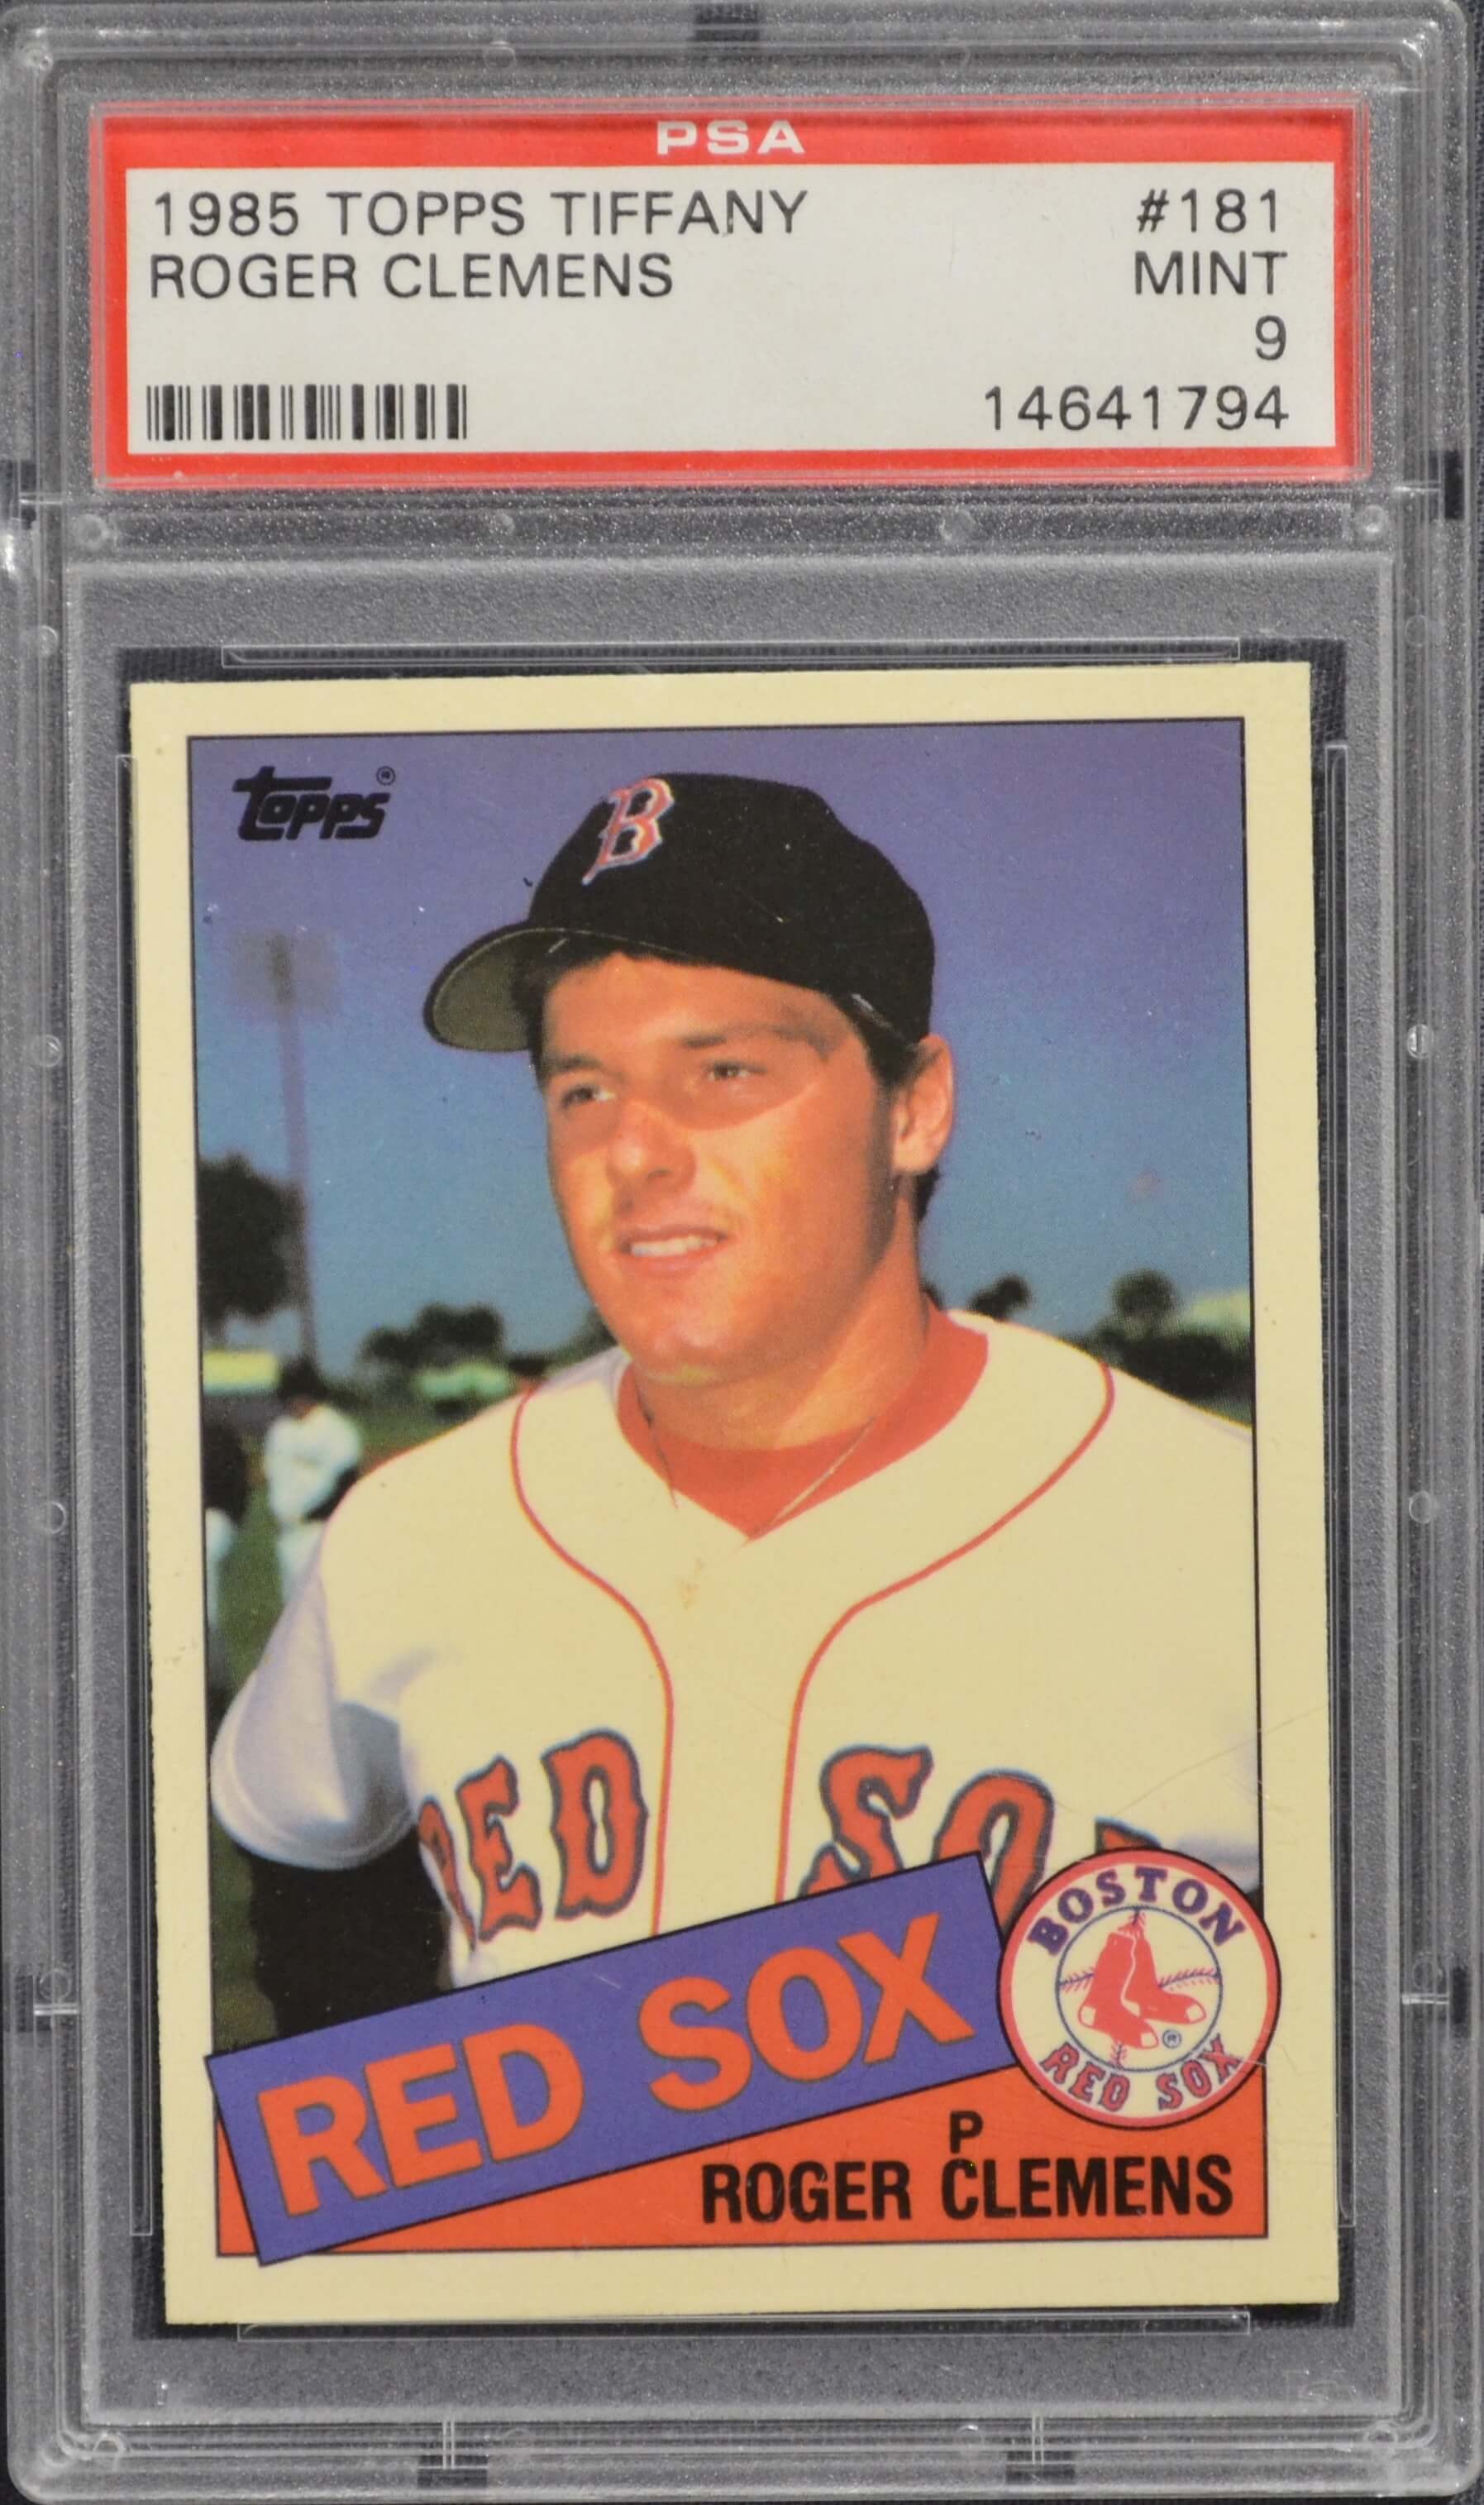 1985 Topps Tiffany #181 Roger Clemens Rookie Card – PSA MINT 9